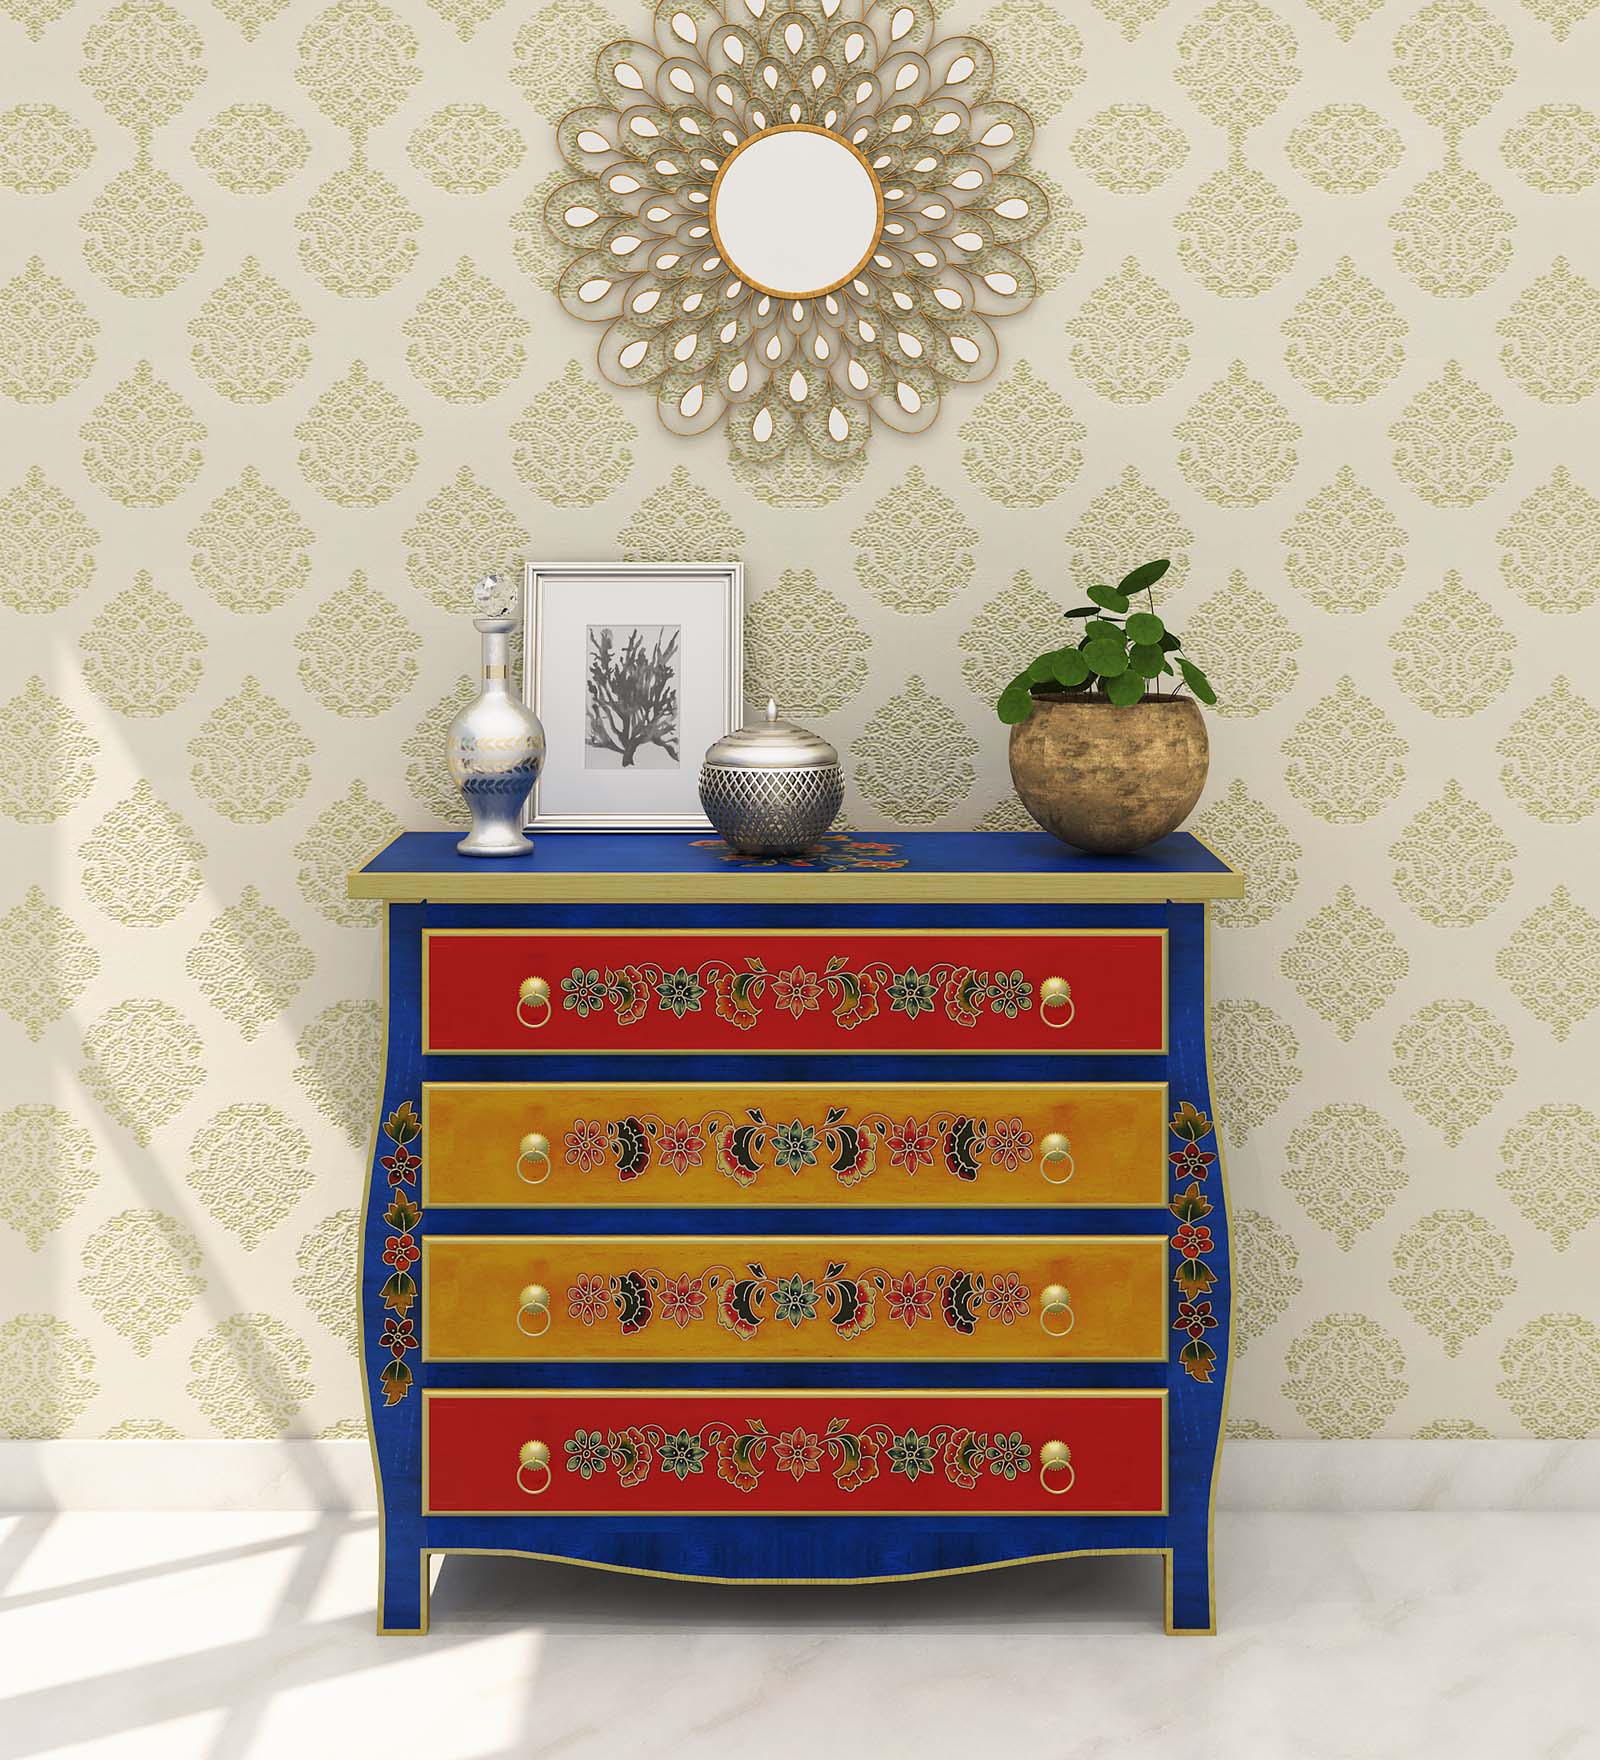 Aadi Solid Wood Hand-Painted Chest of Four Drawers by Mudramark from Pepperfry Rs. 33,499